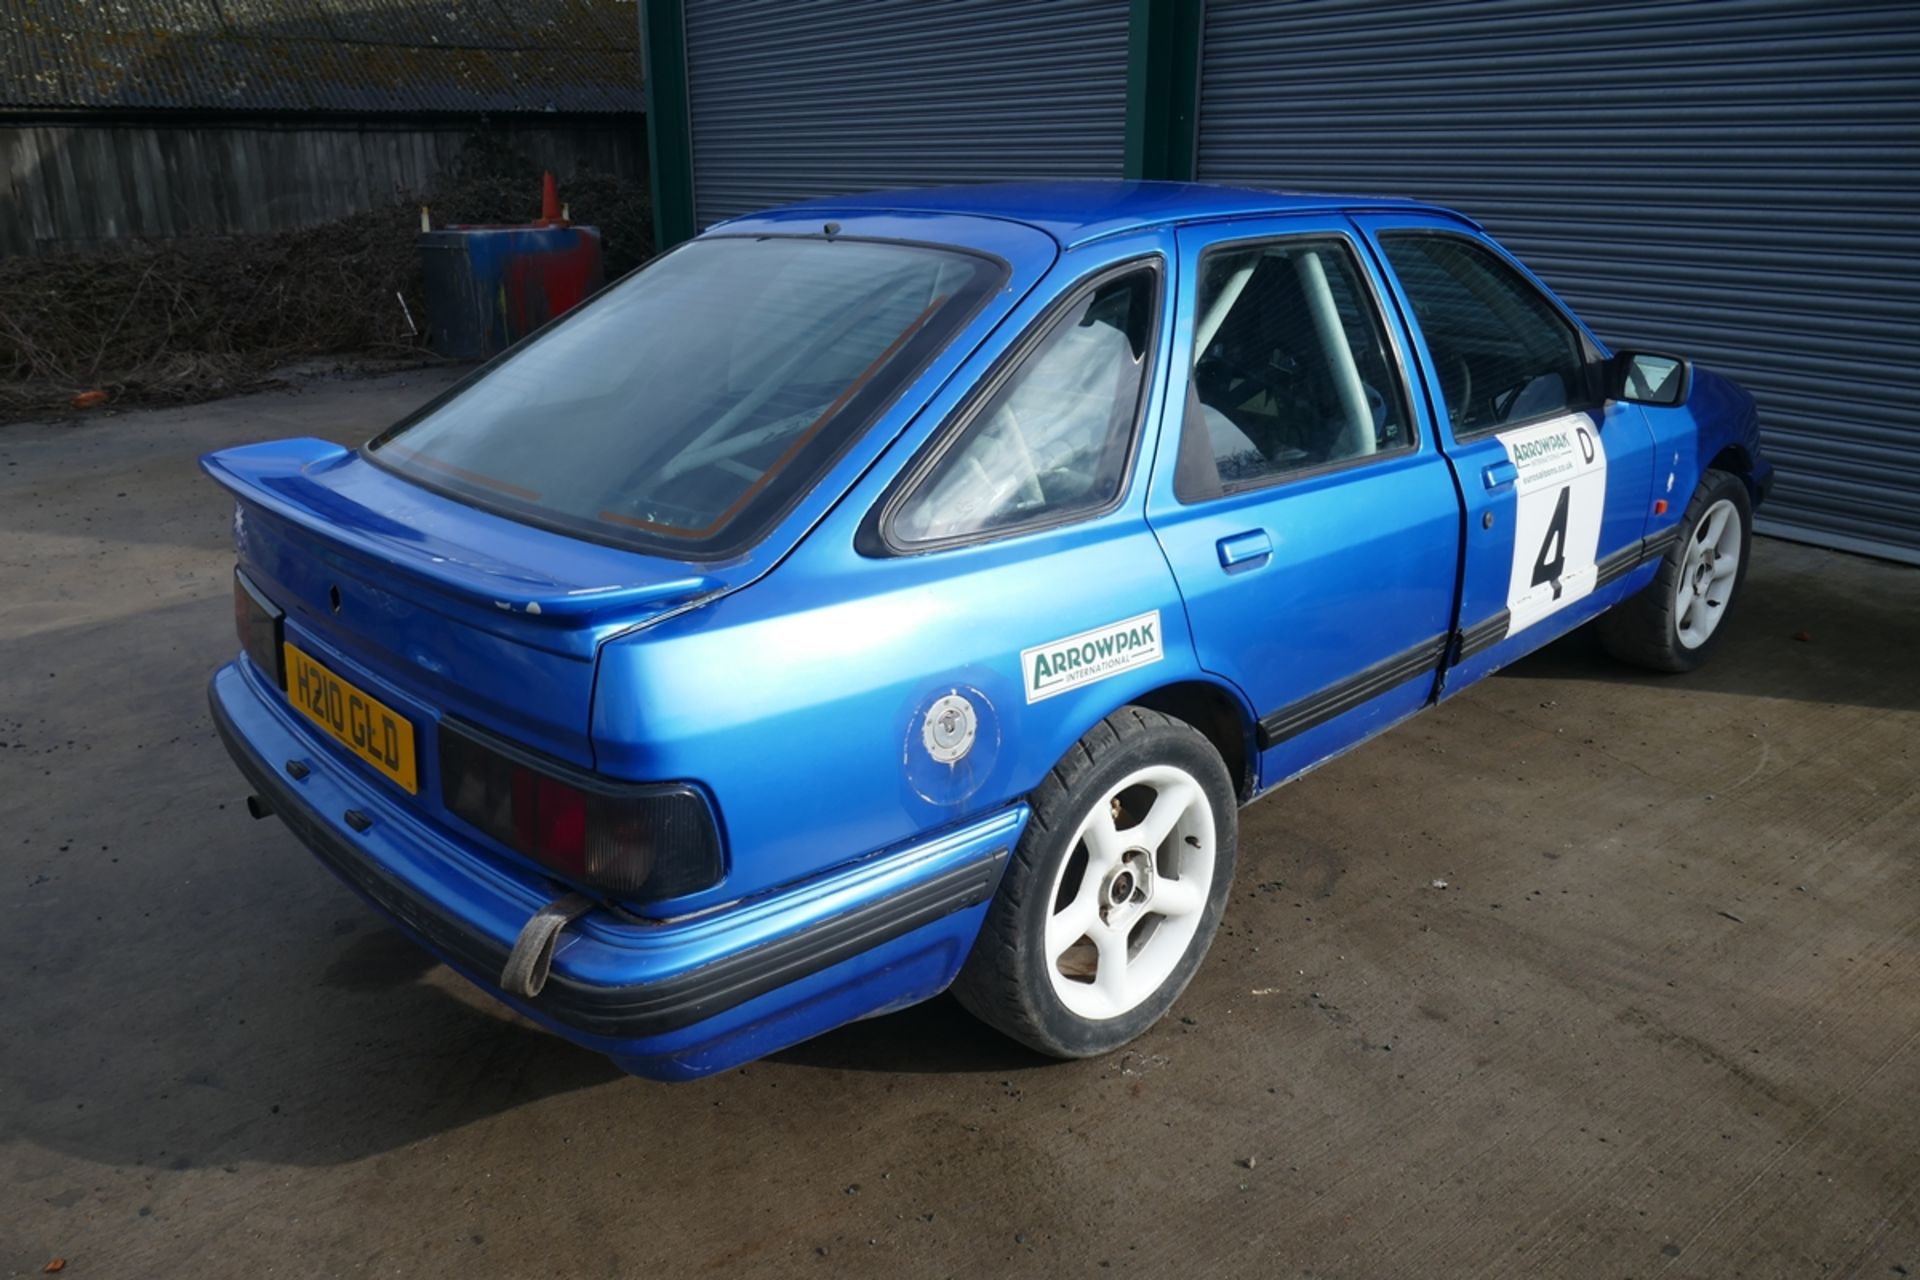 H reg 1990 Ford Sierra 4x4 rally car with V6 Cosworth engine running order with roll cage, fuel cell - Image 3 of 15